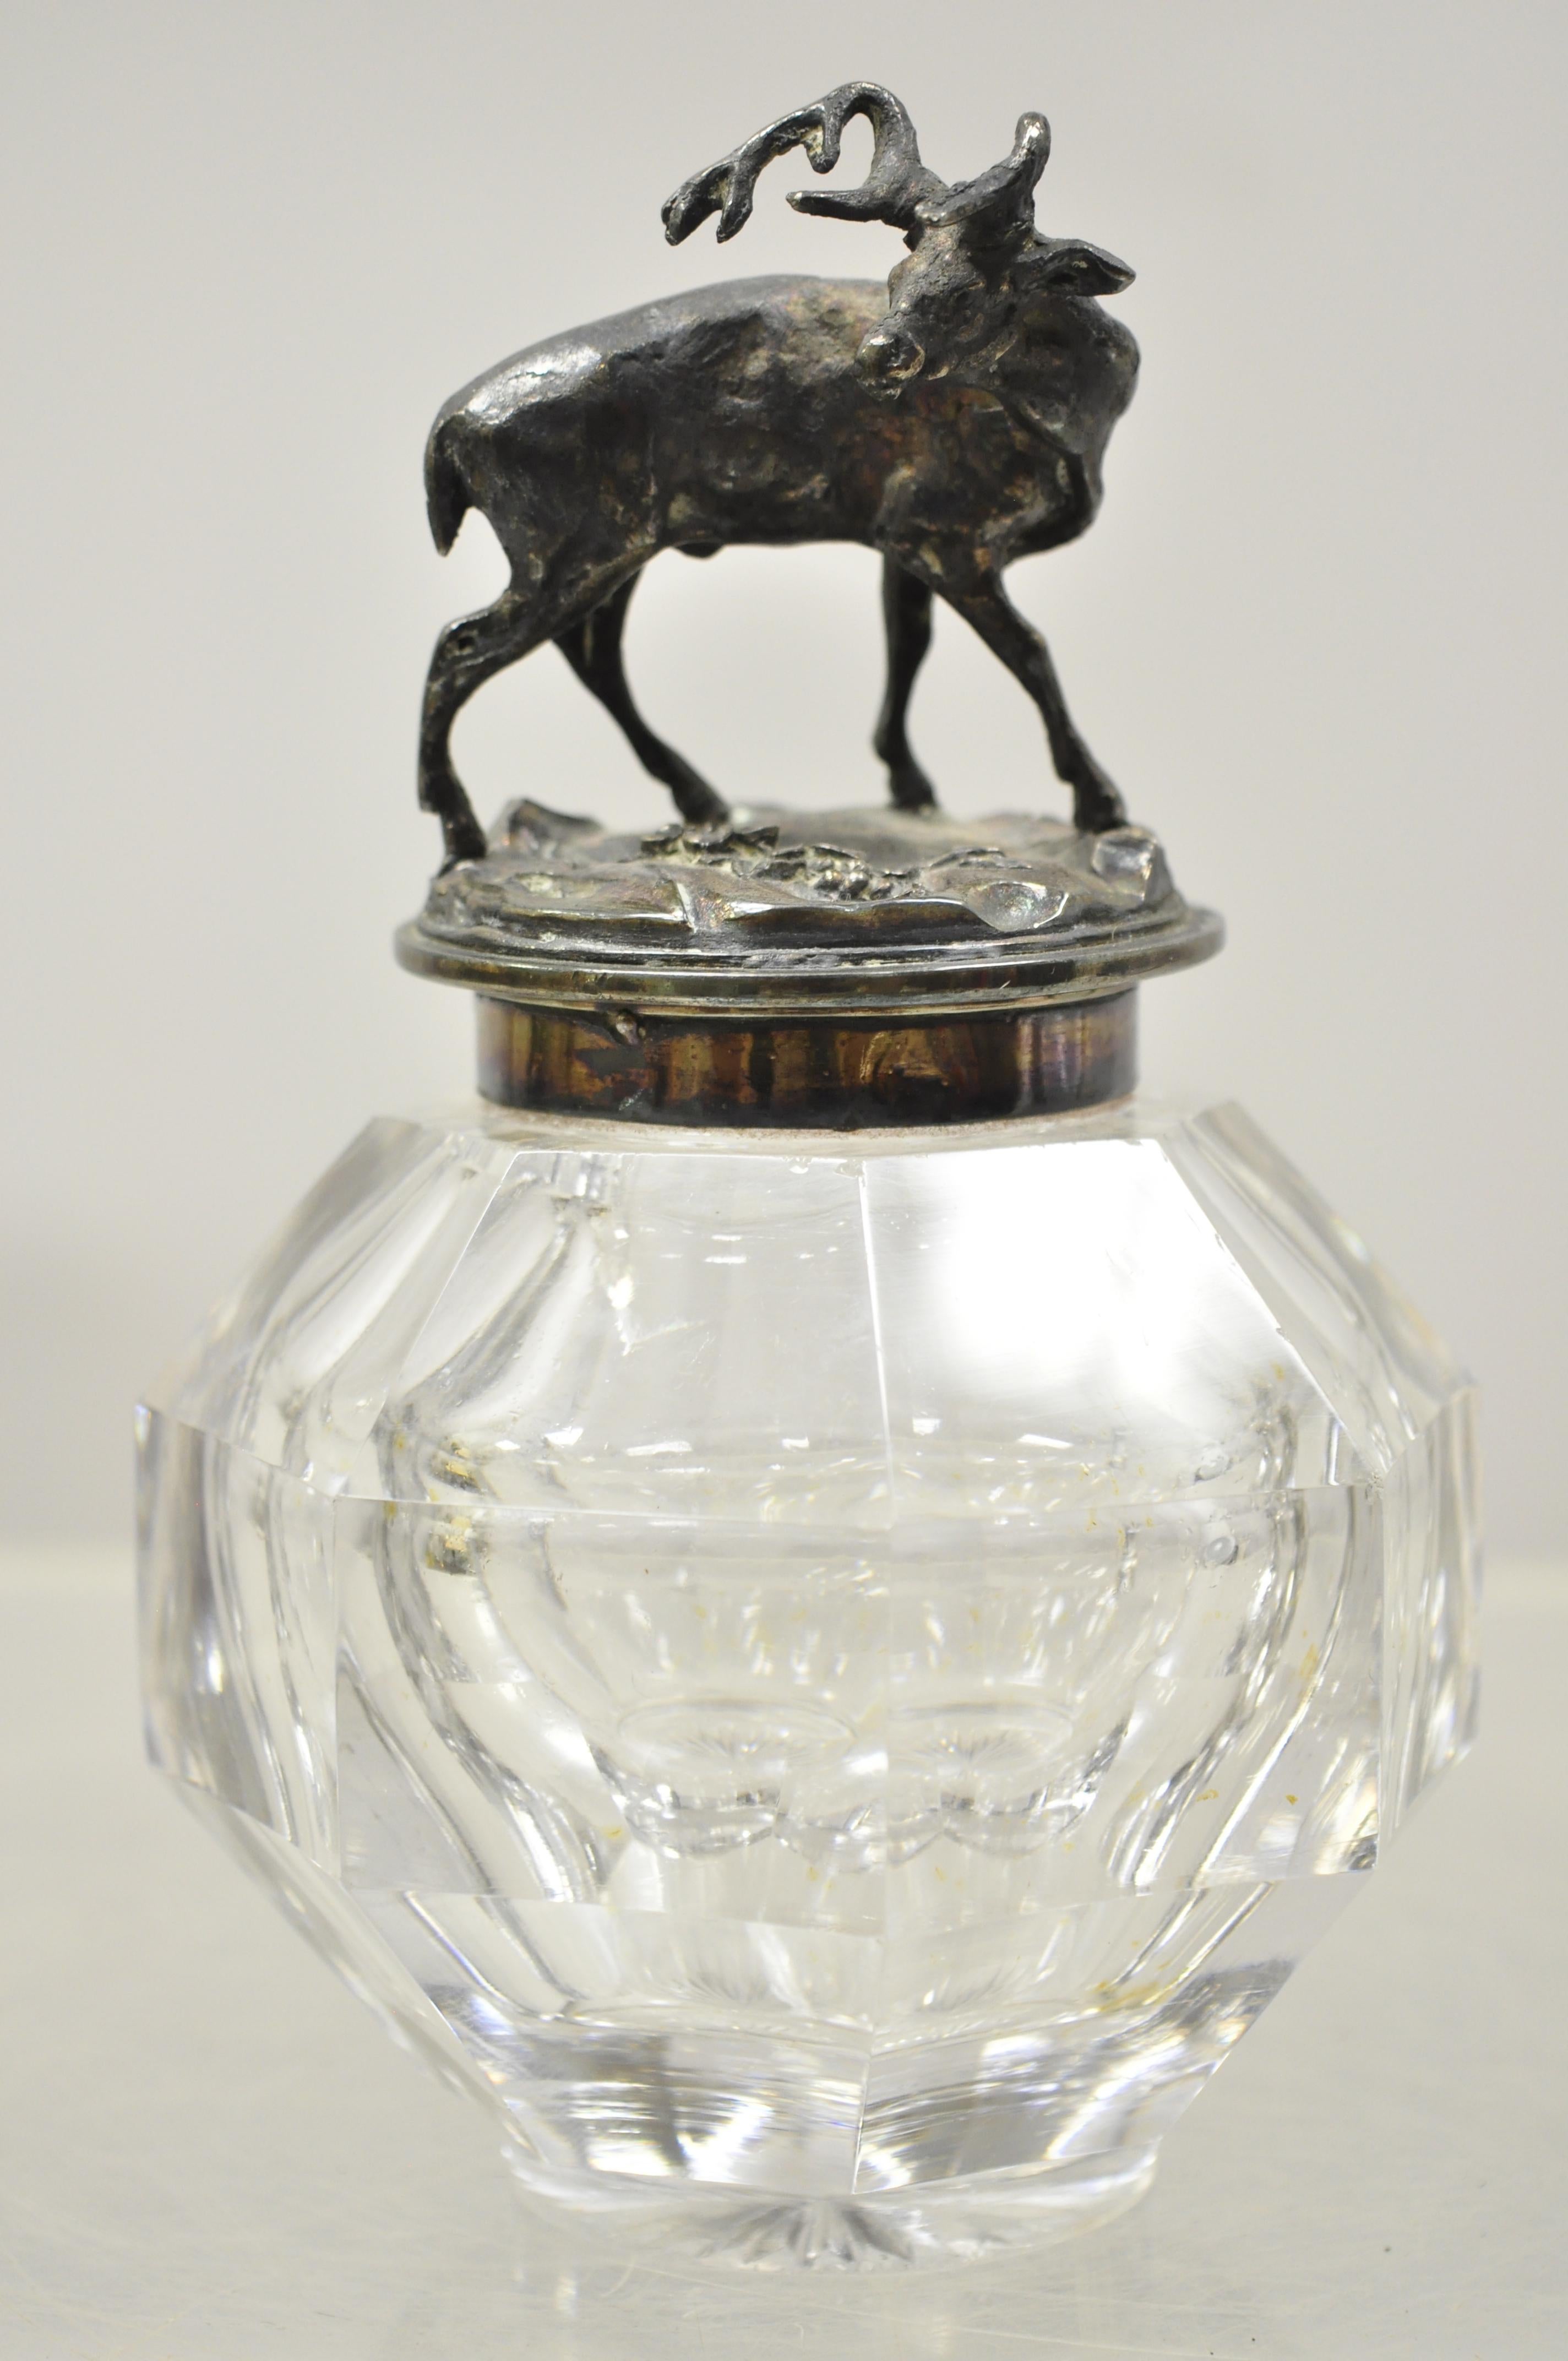 Antique English Victorian silver plated figural platter tray with stag mounted glass inkwell attributed to Gorham & Son. Item raised on ball and claw feet, four different hunting scenes to tray with cherubs and shells, inkwell is topped with silver